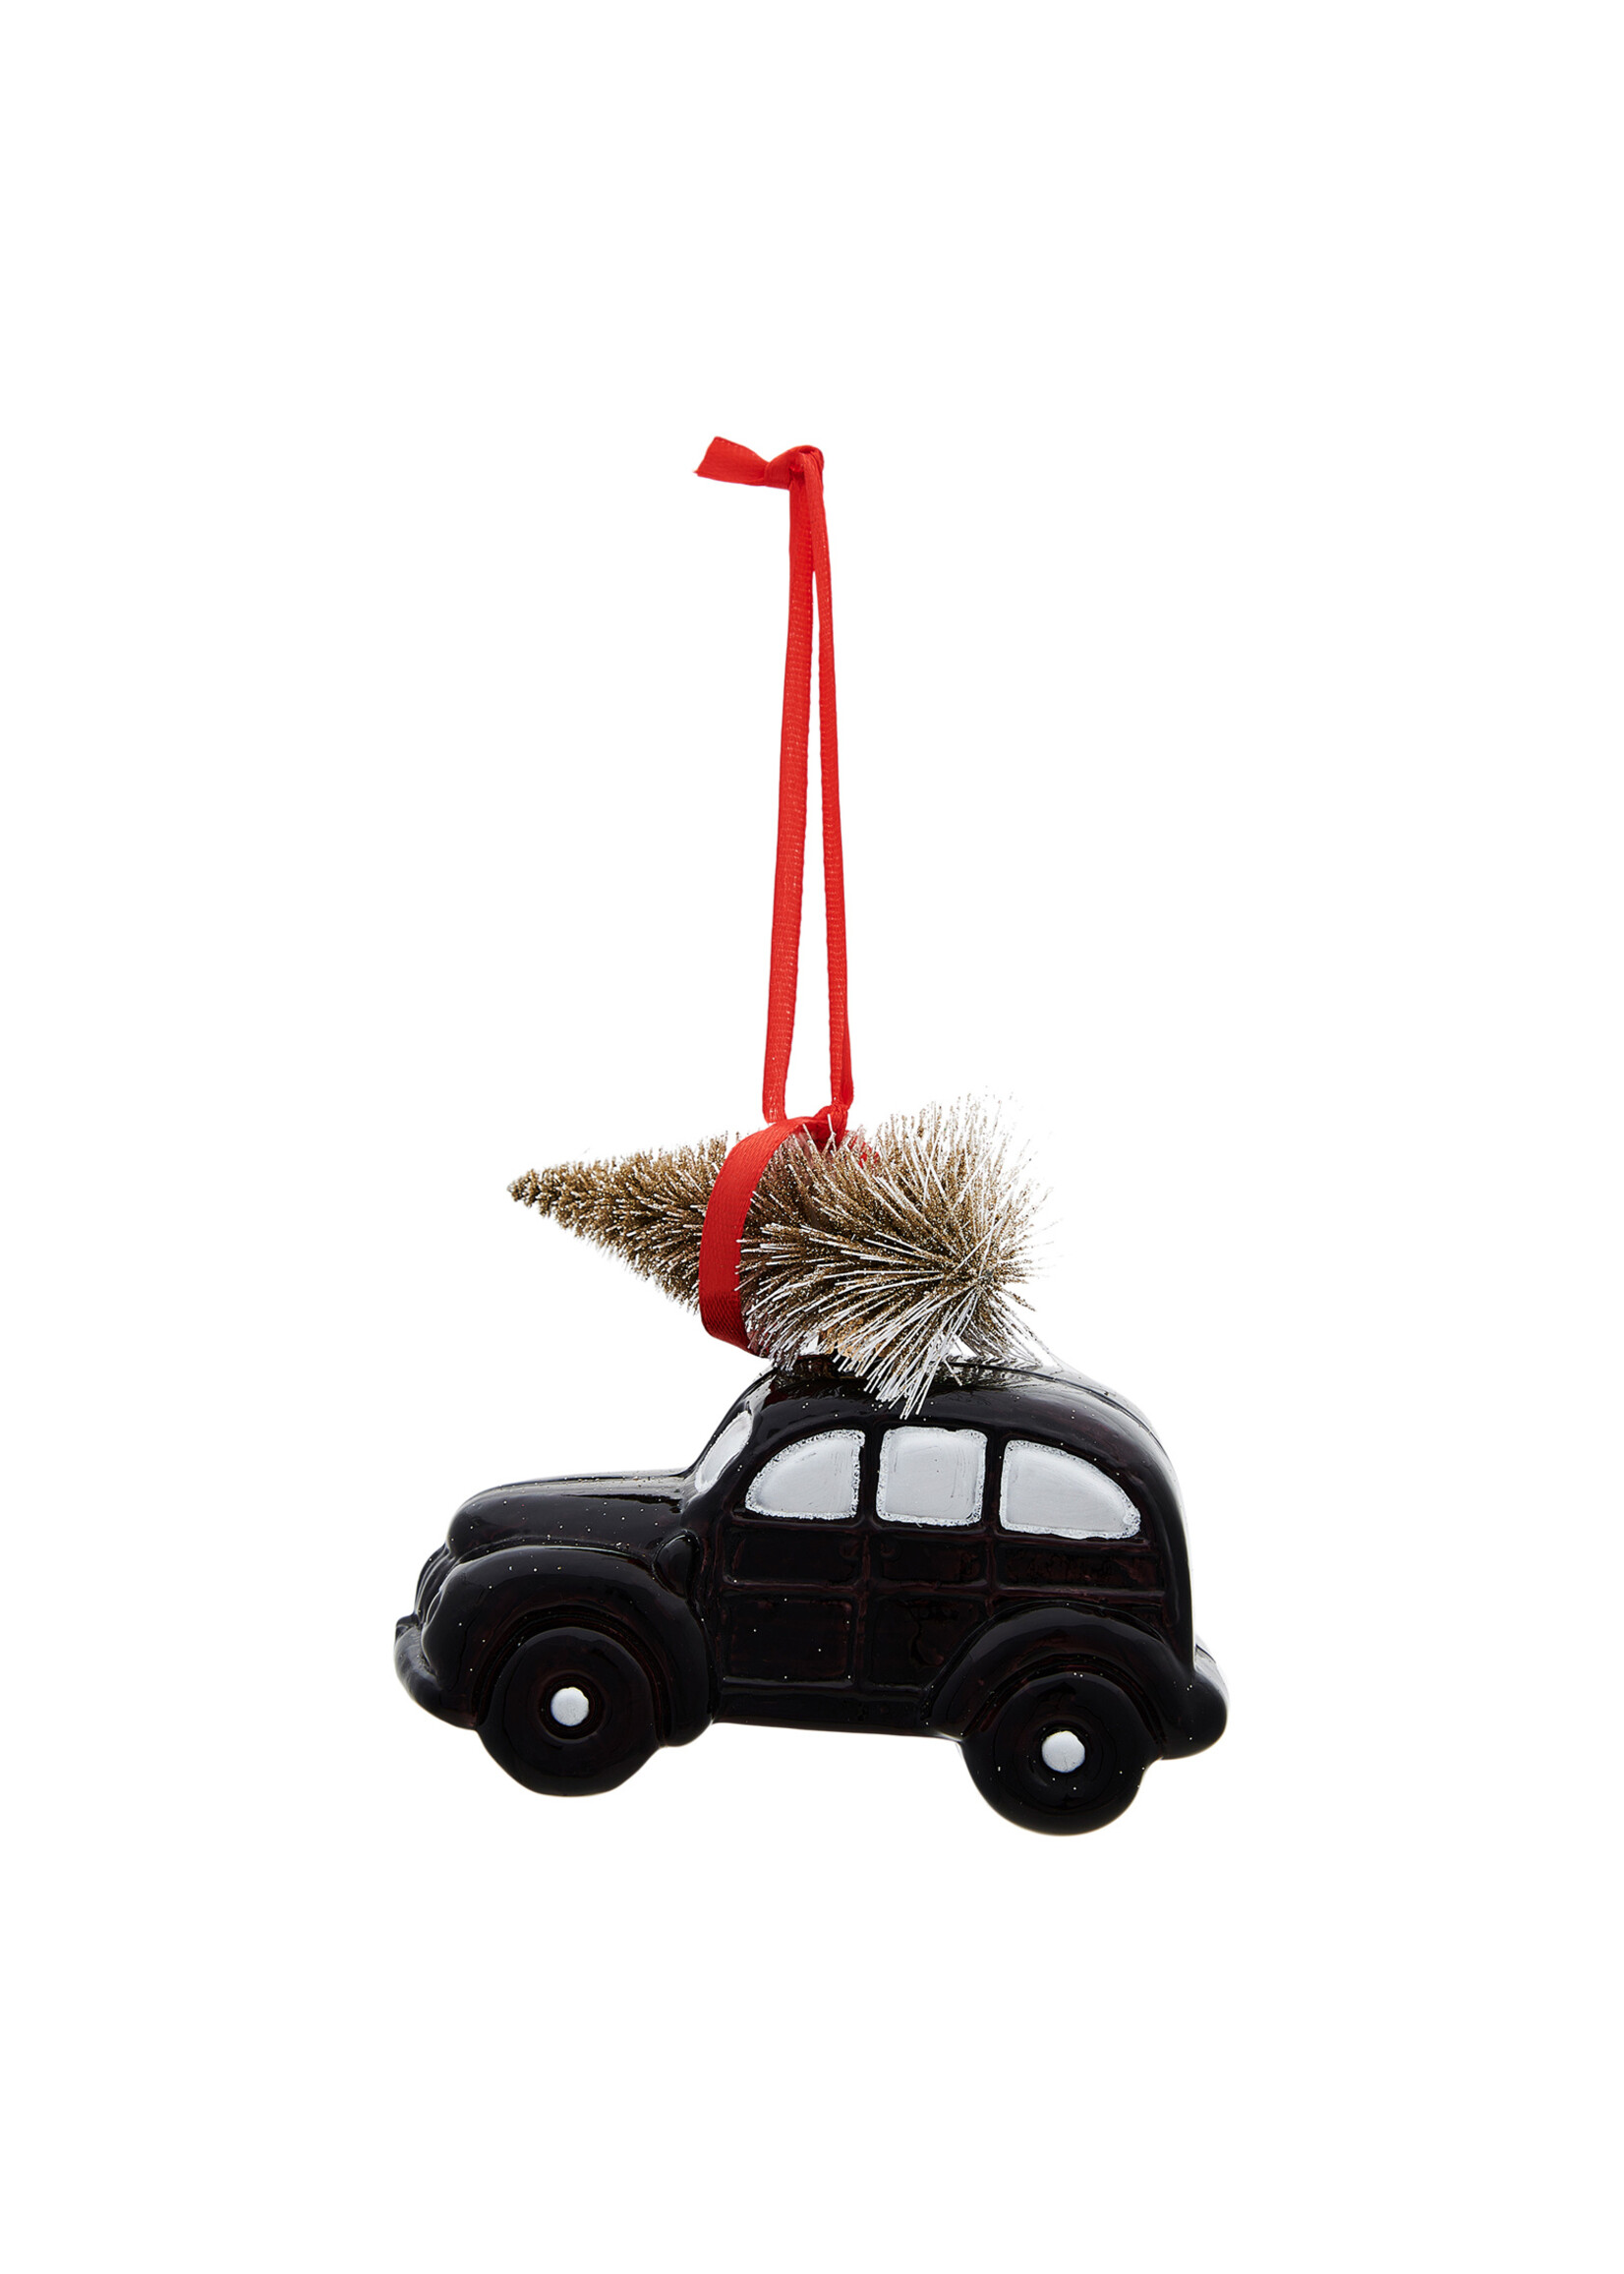 Riviera Maison Driving Home For Christmas Ornament